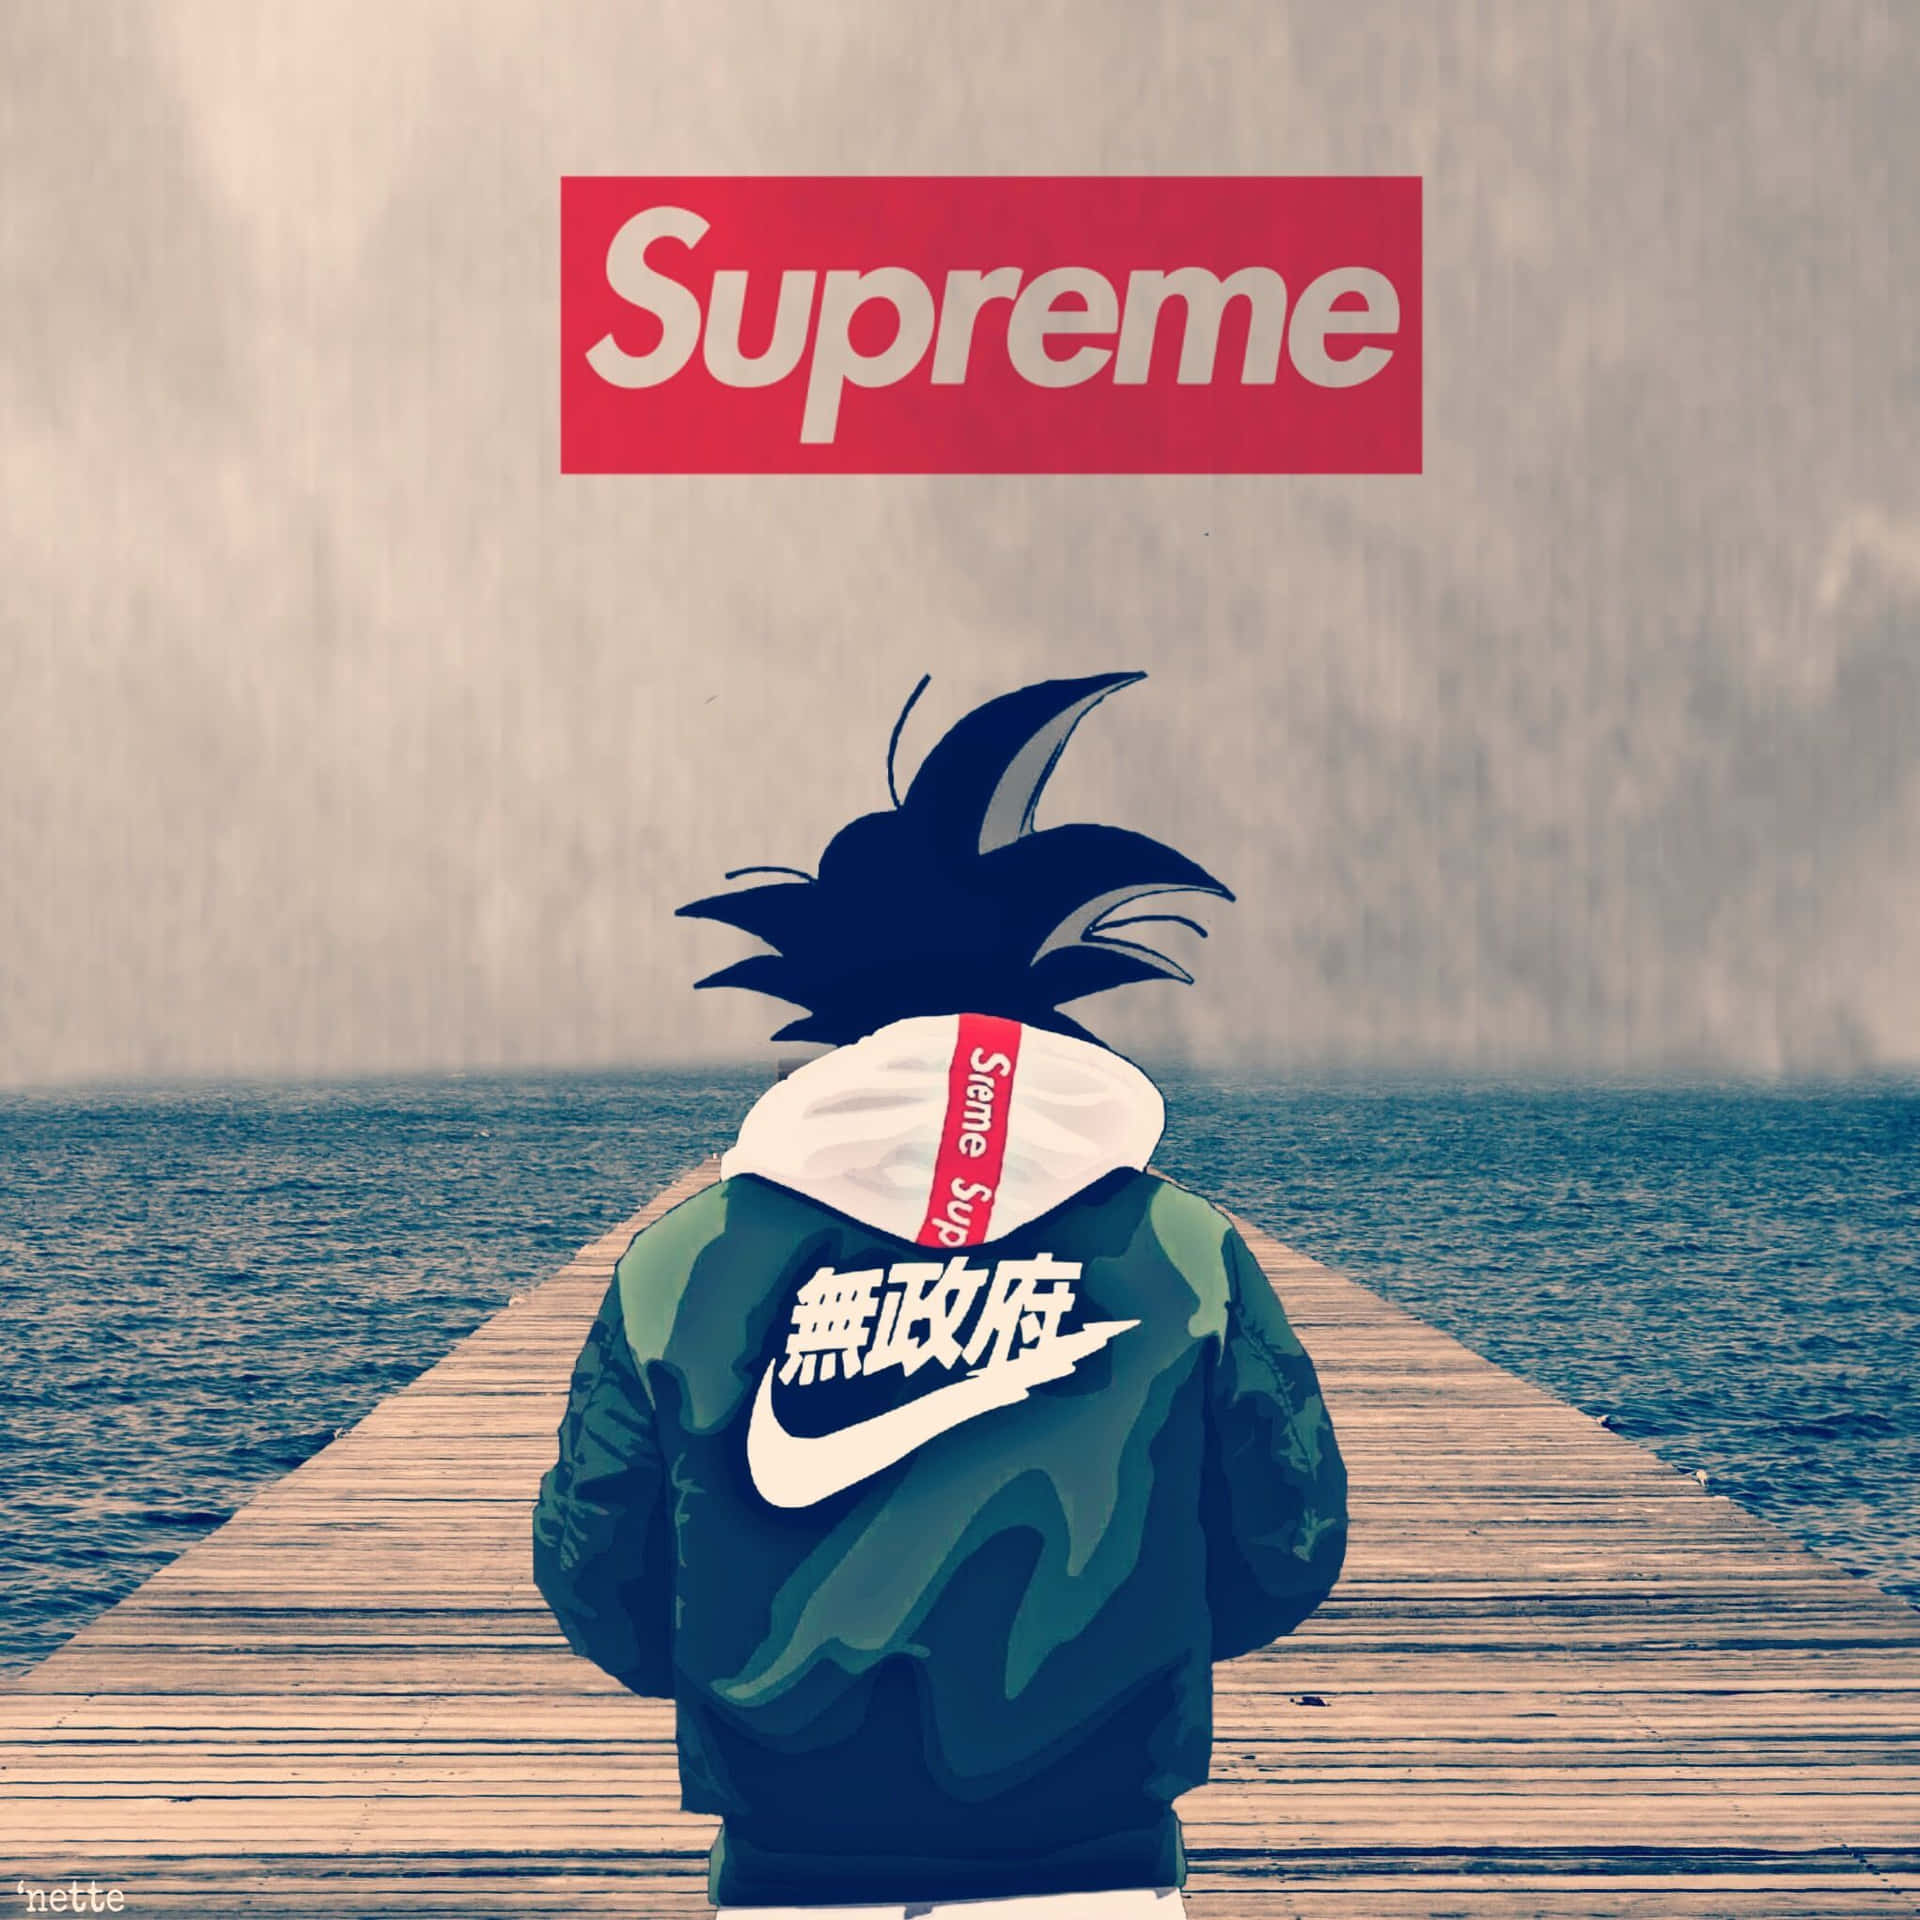 Fly higher than ever before with Goku Supreme Wallpaper